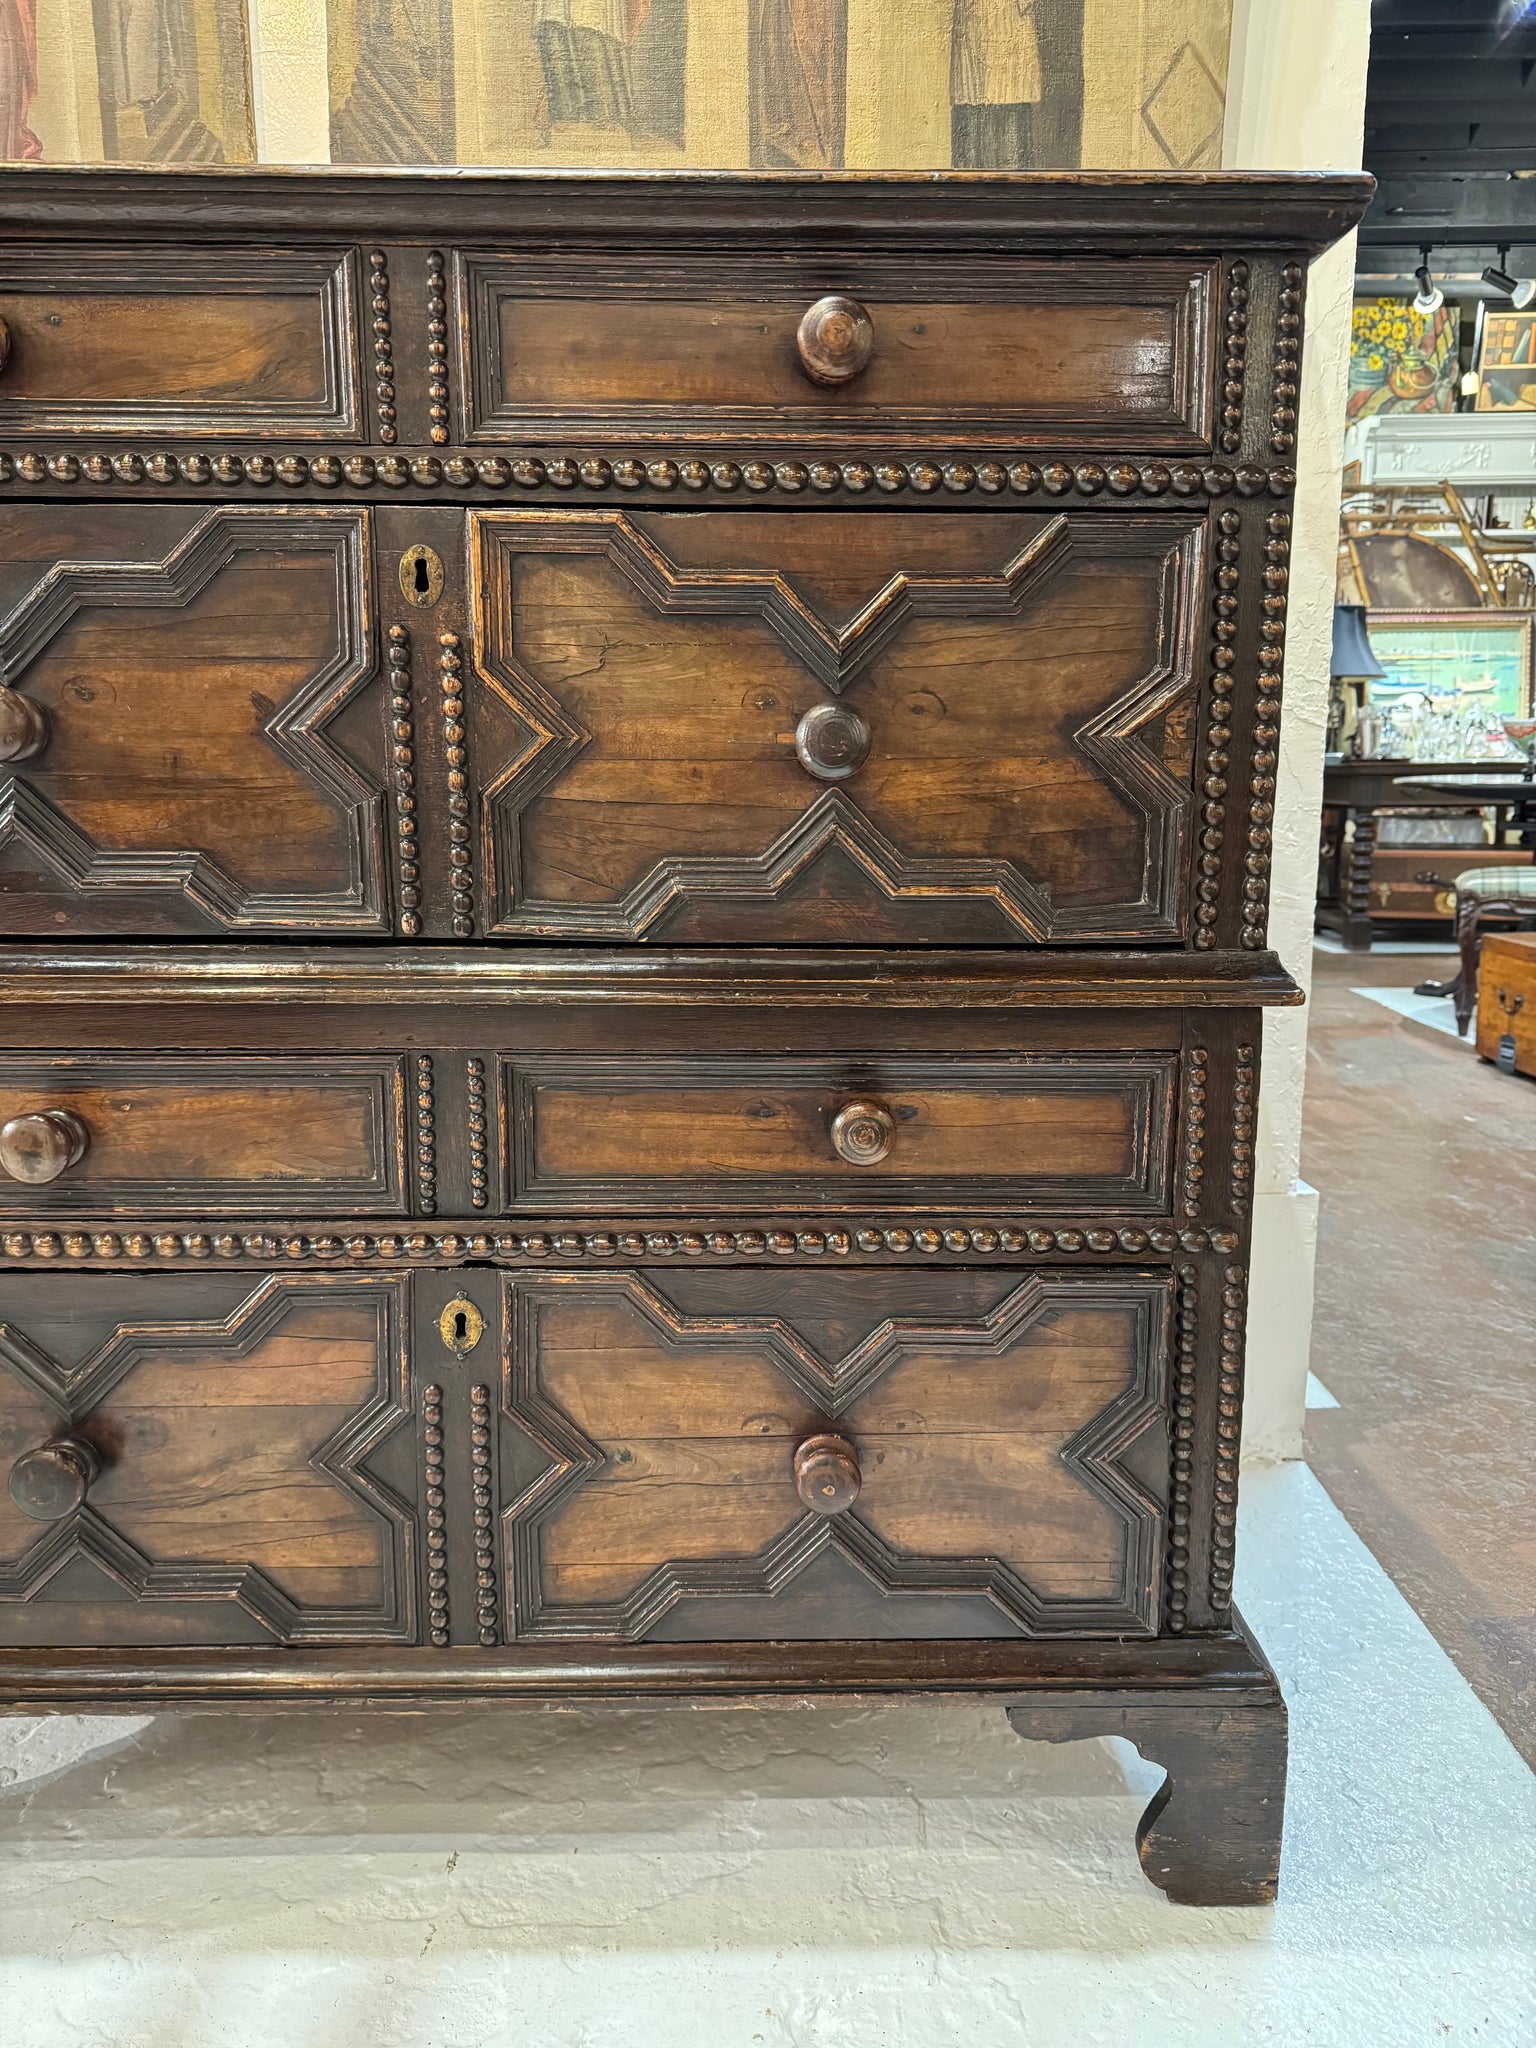 English Chest of Drawers